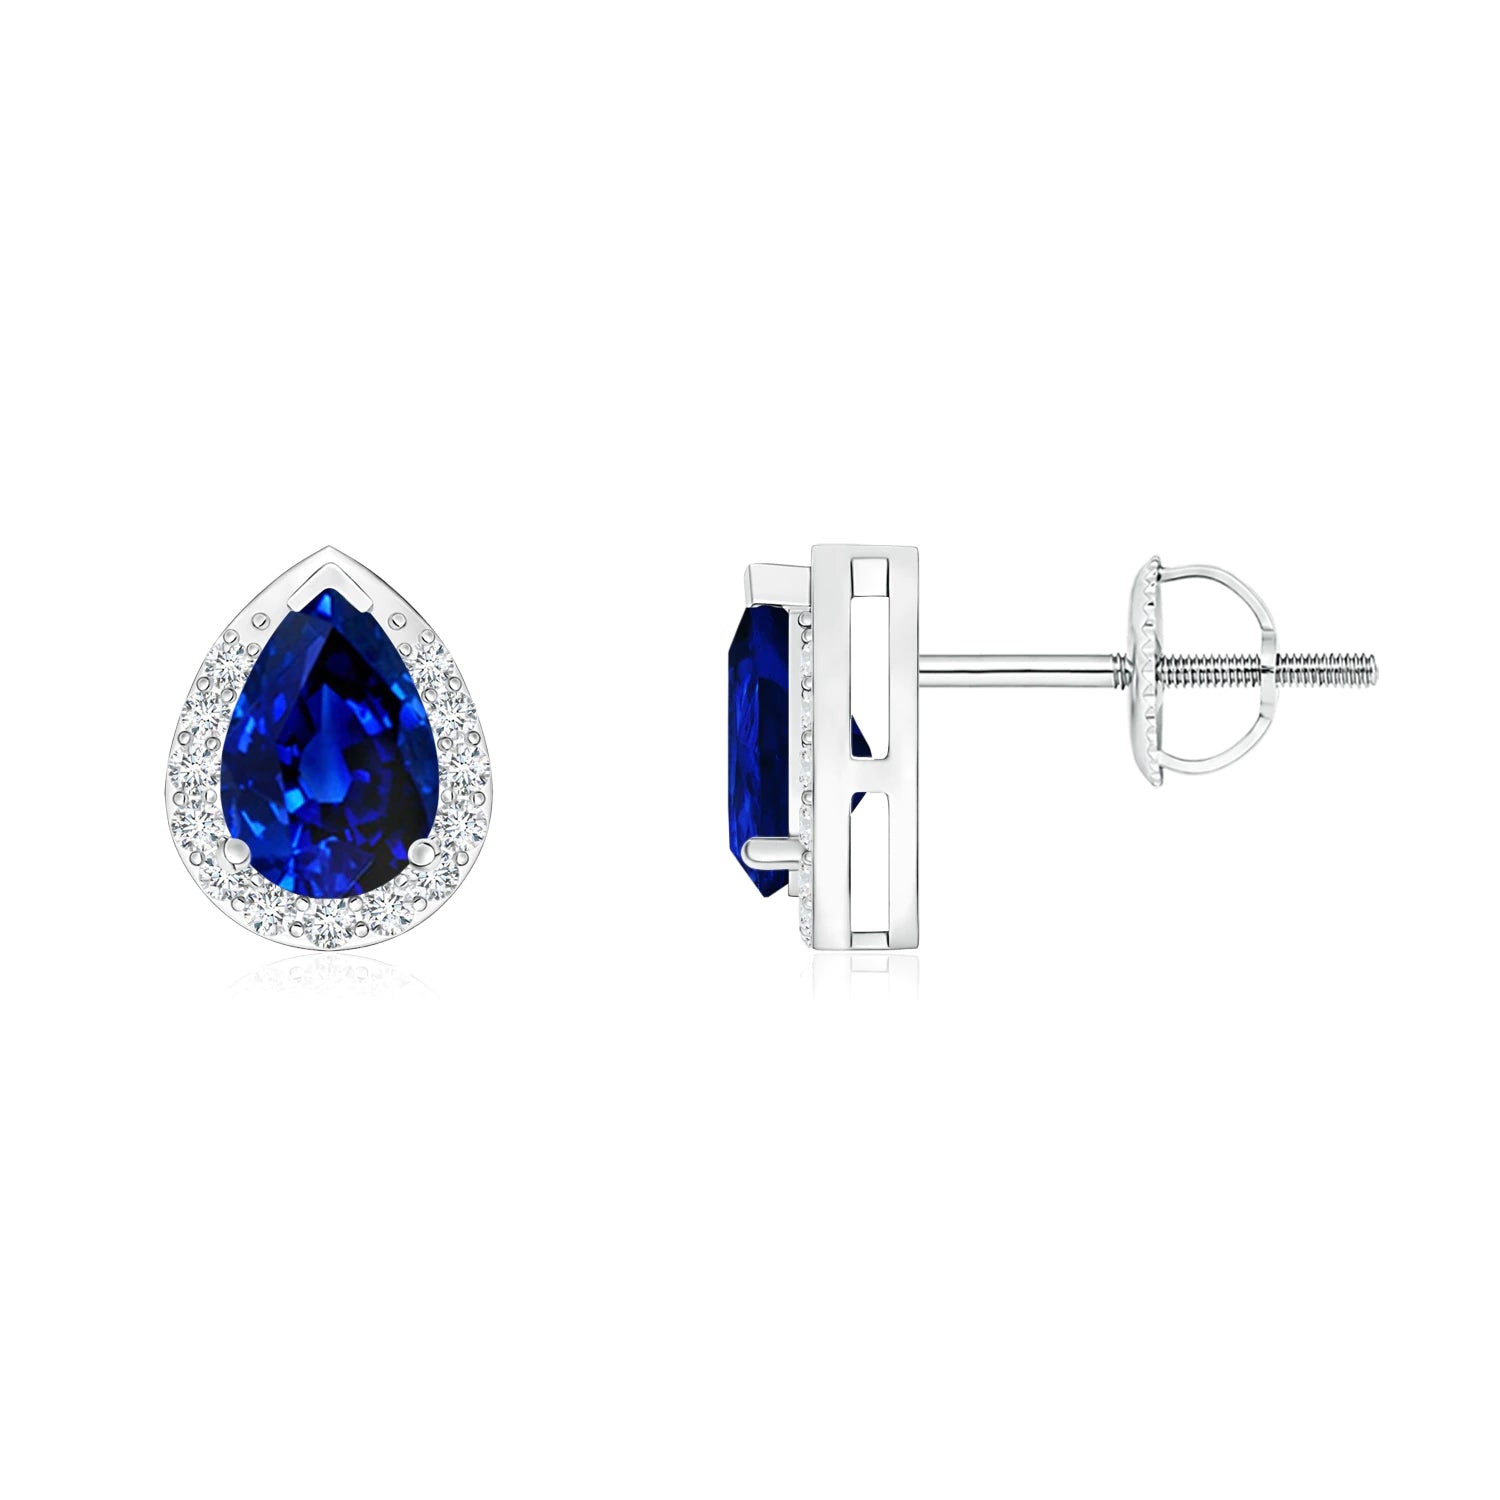 1.12 CT. Pear-Shaped Sapphire Stud Earrings with Halo